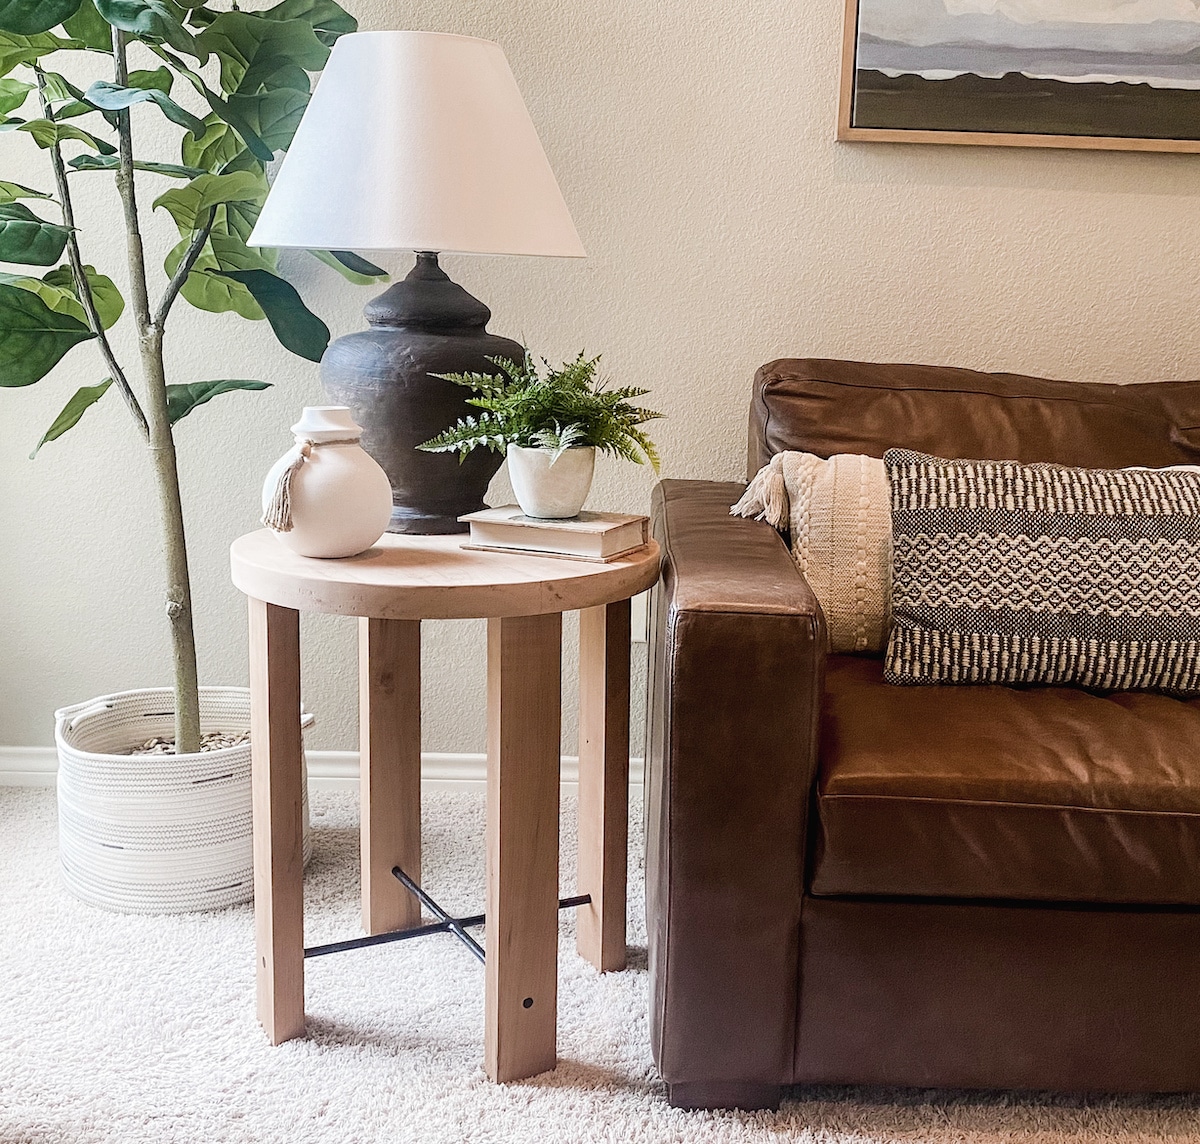 How to Build a Side Table: Free Woodworking Plans